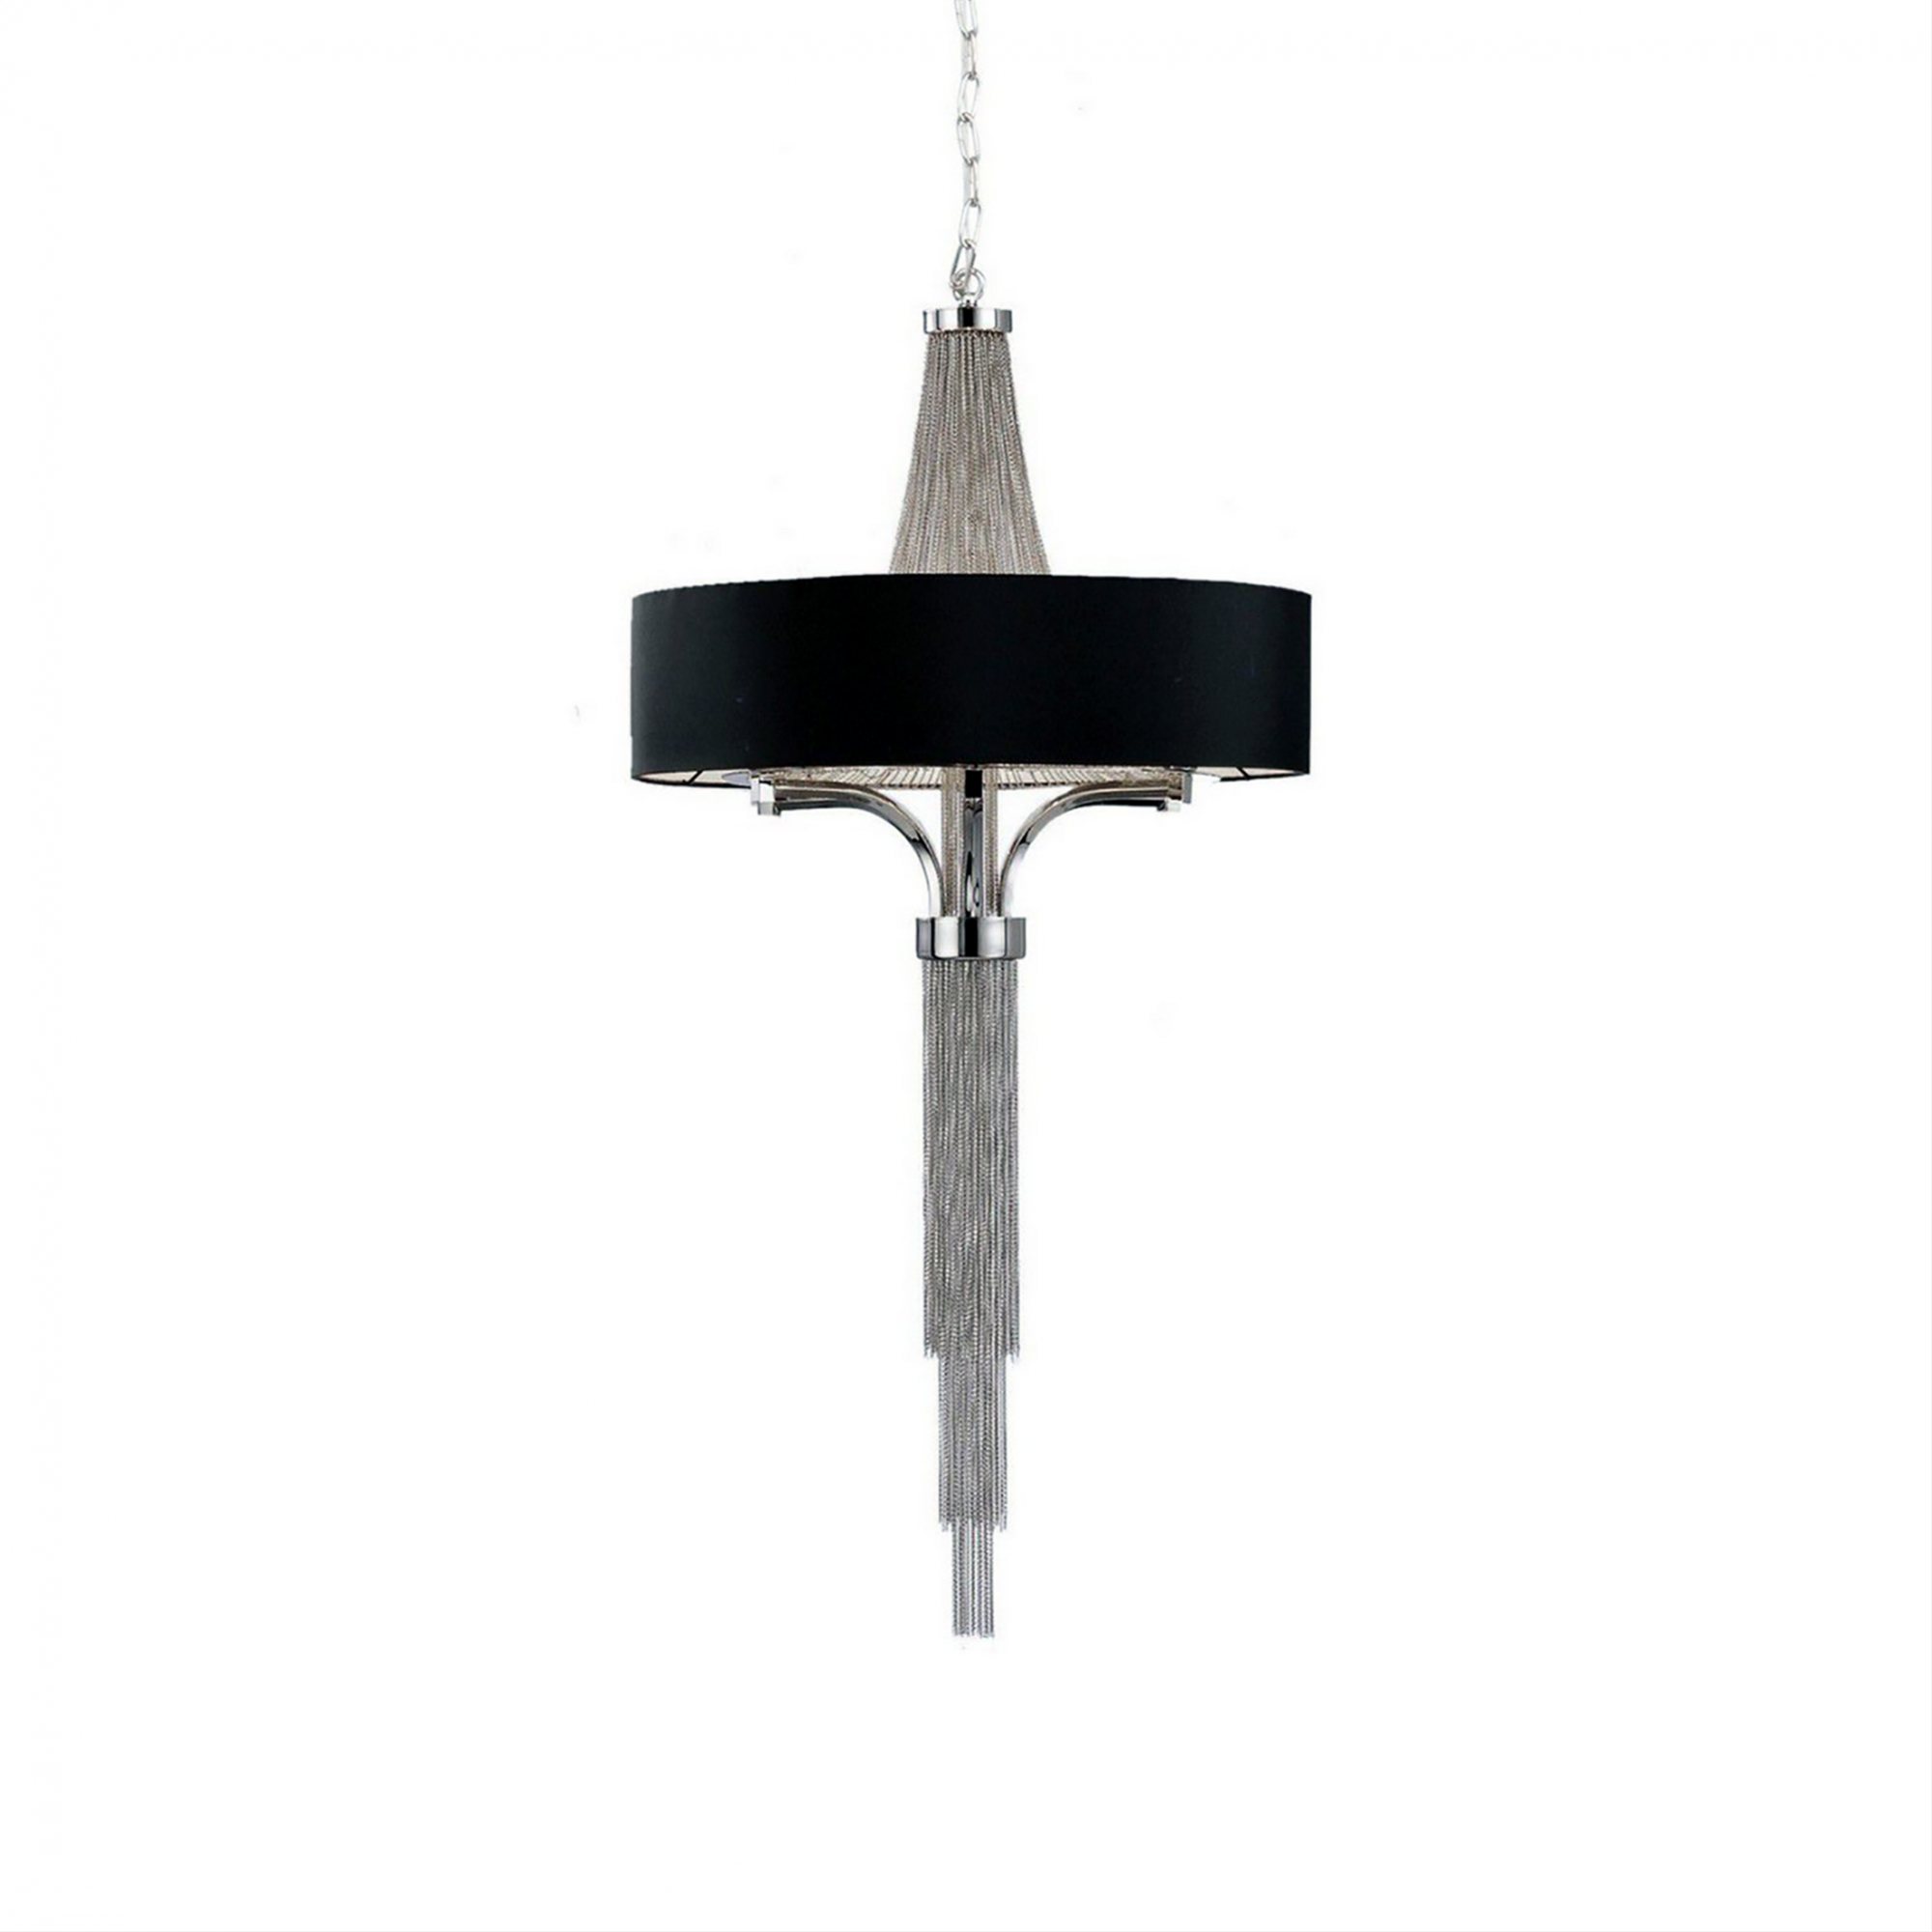 Langham Small Chandelier With Black, Small Chandelier Lamp Shades Uk